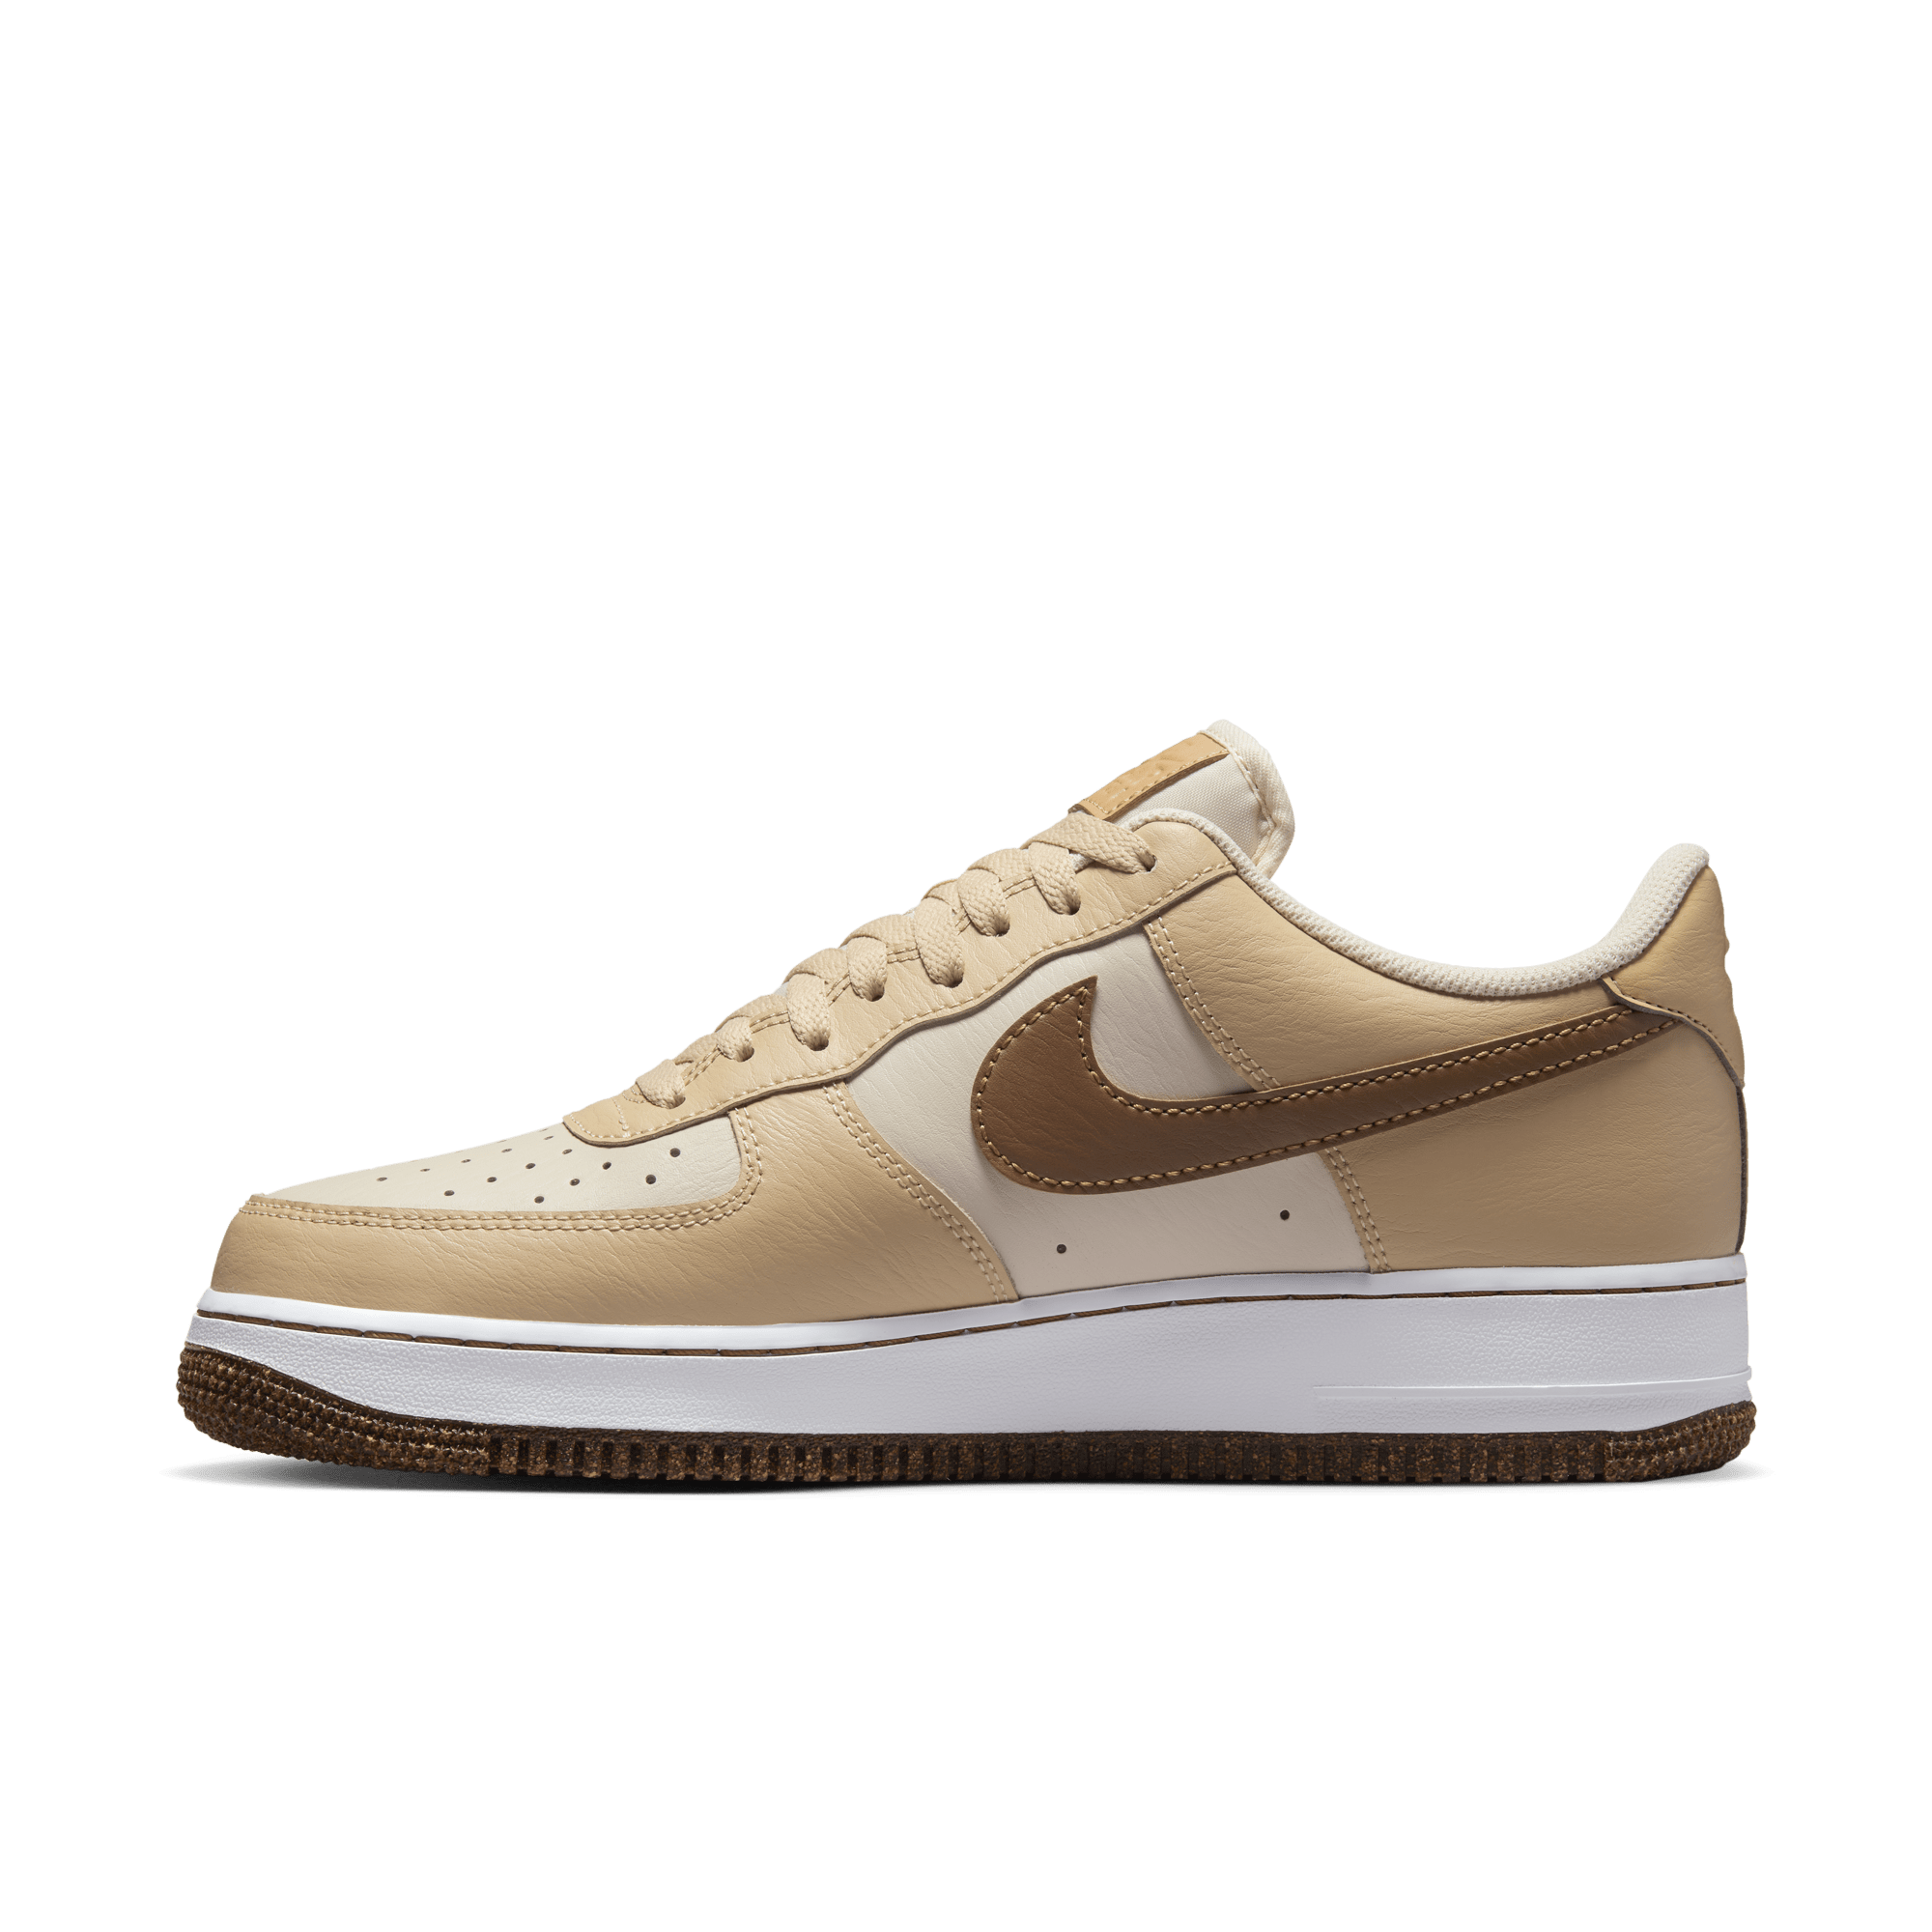 Nike Air Force 1 LV8 Men's Shoes